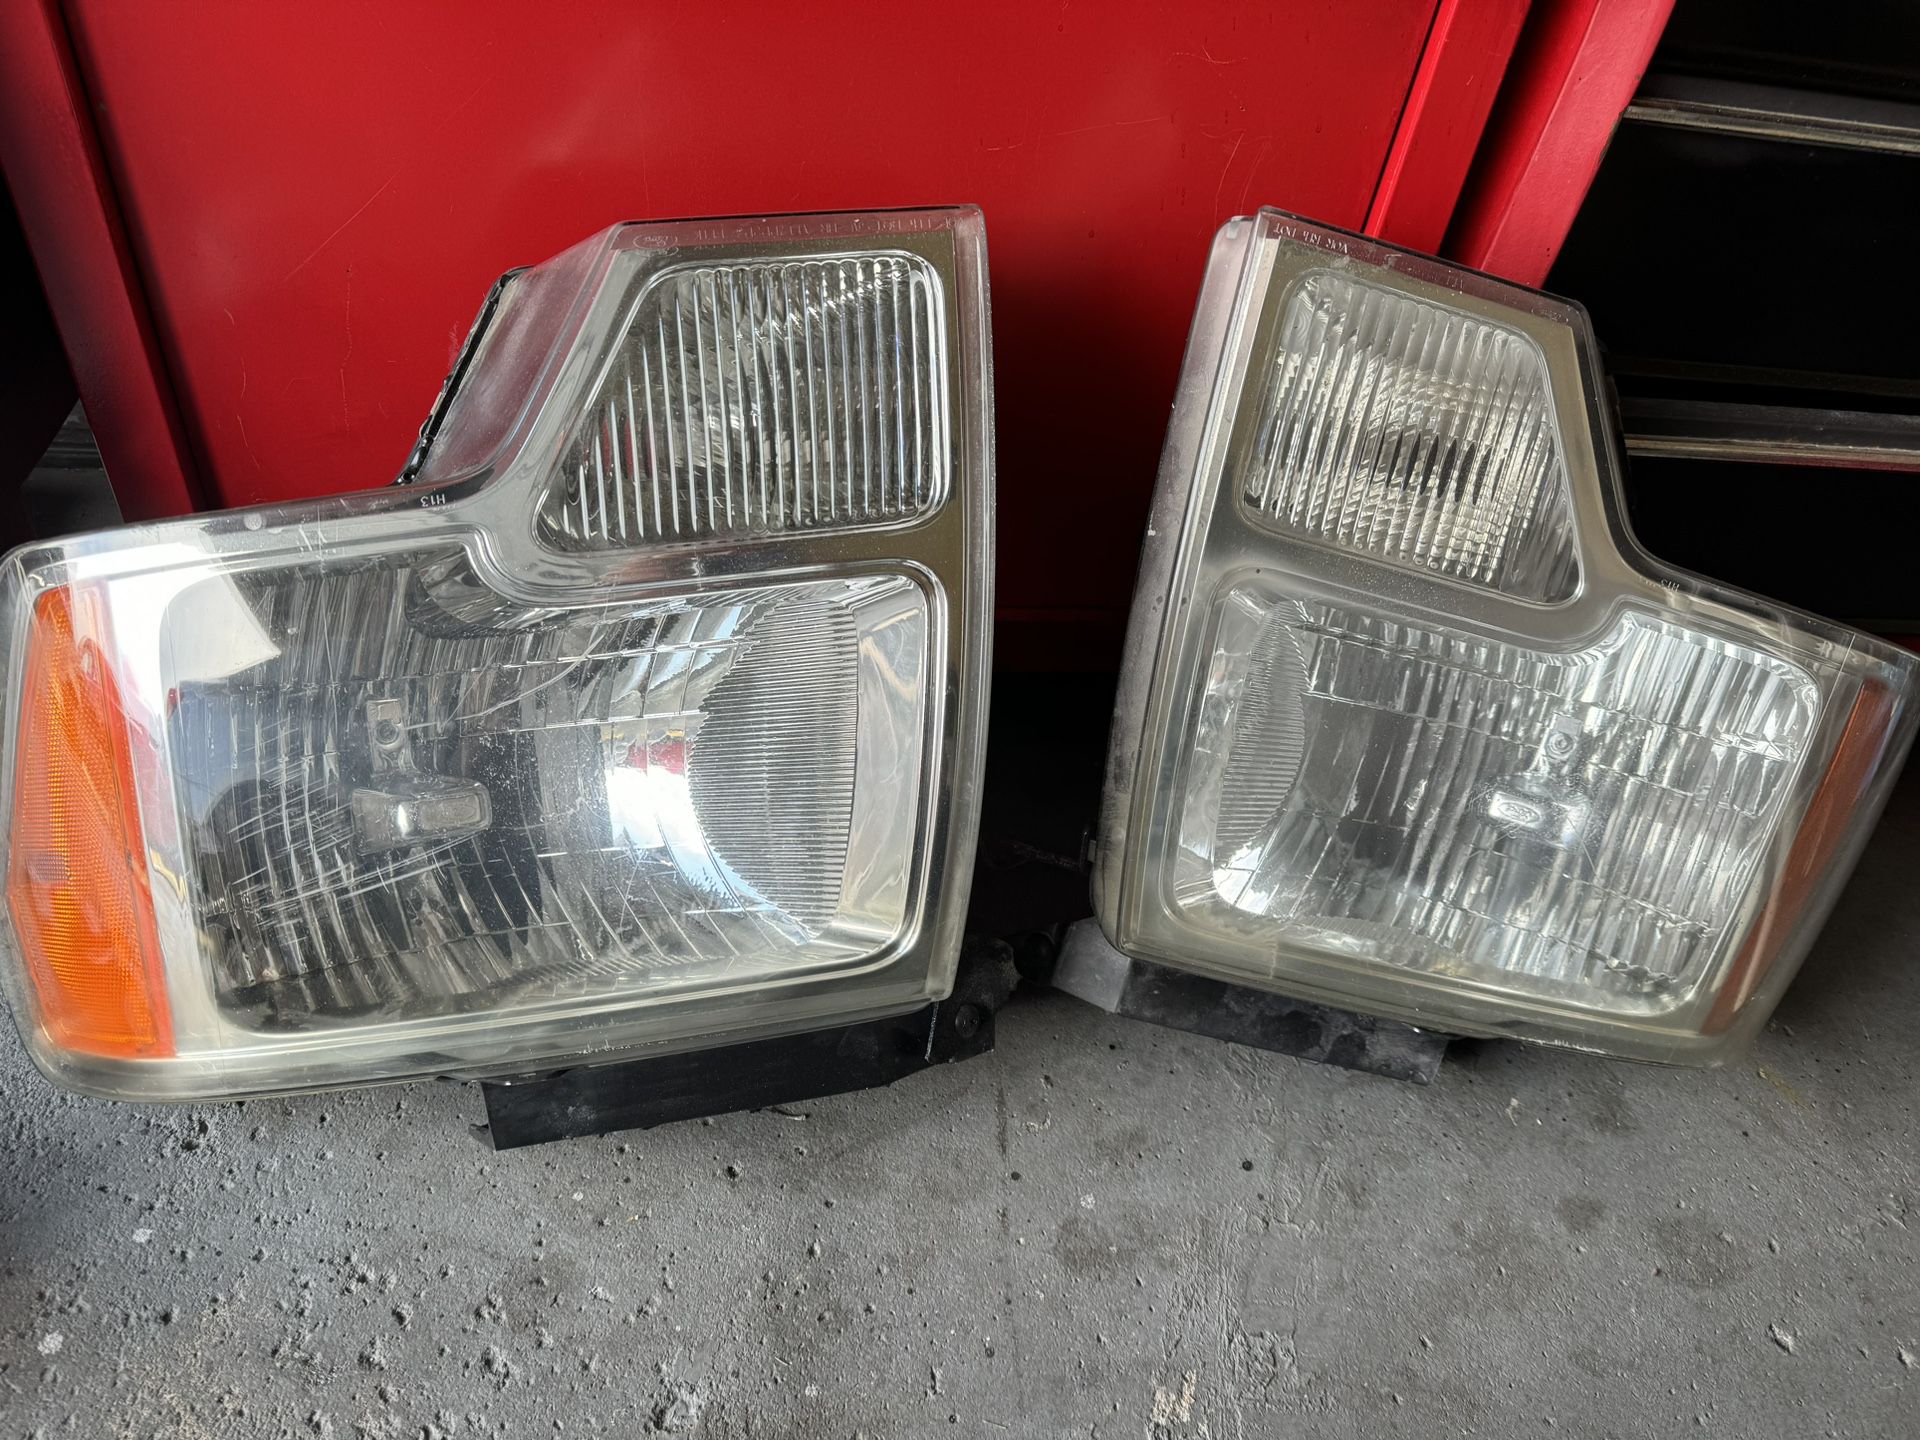 oem Headlights For 2009-2014 Ford F150